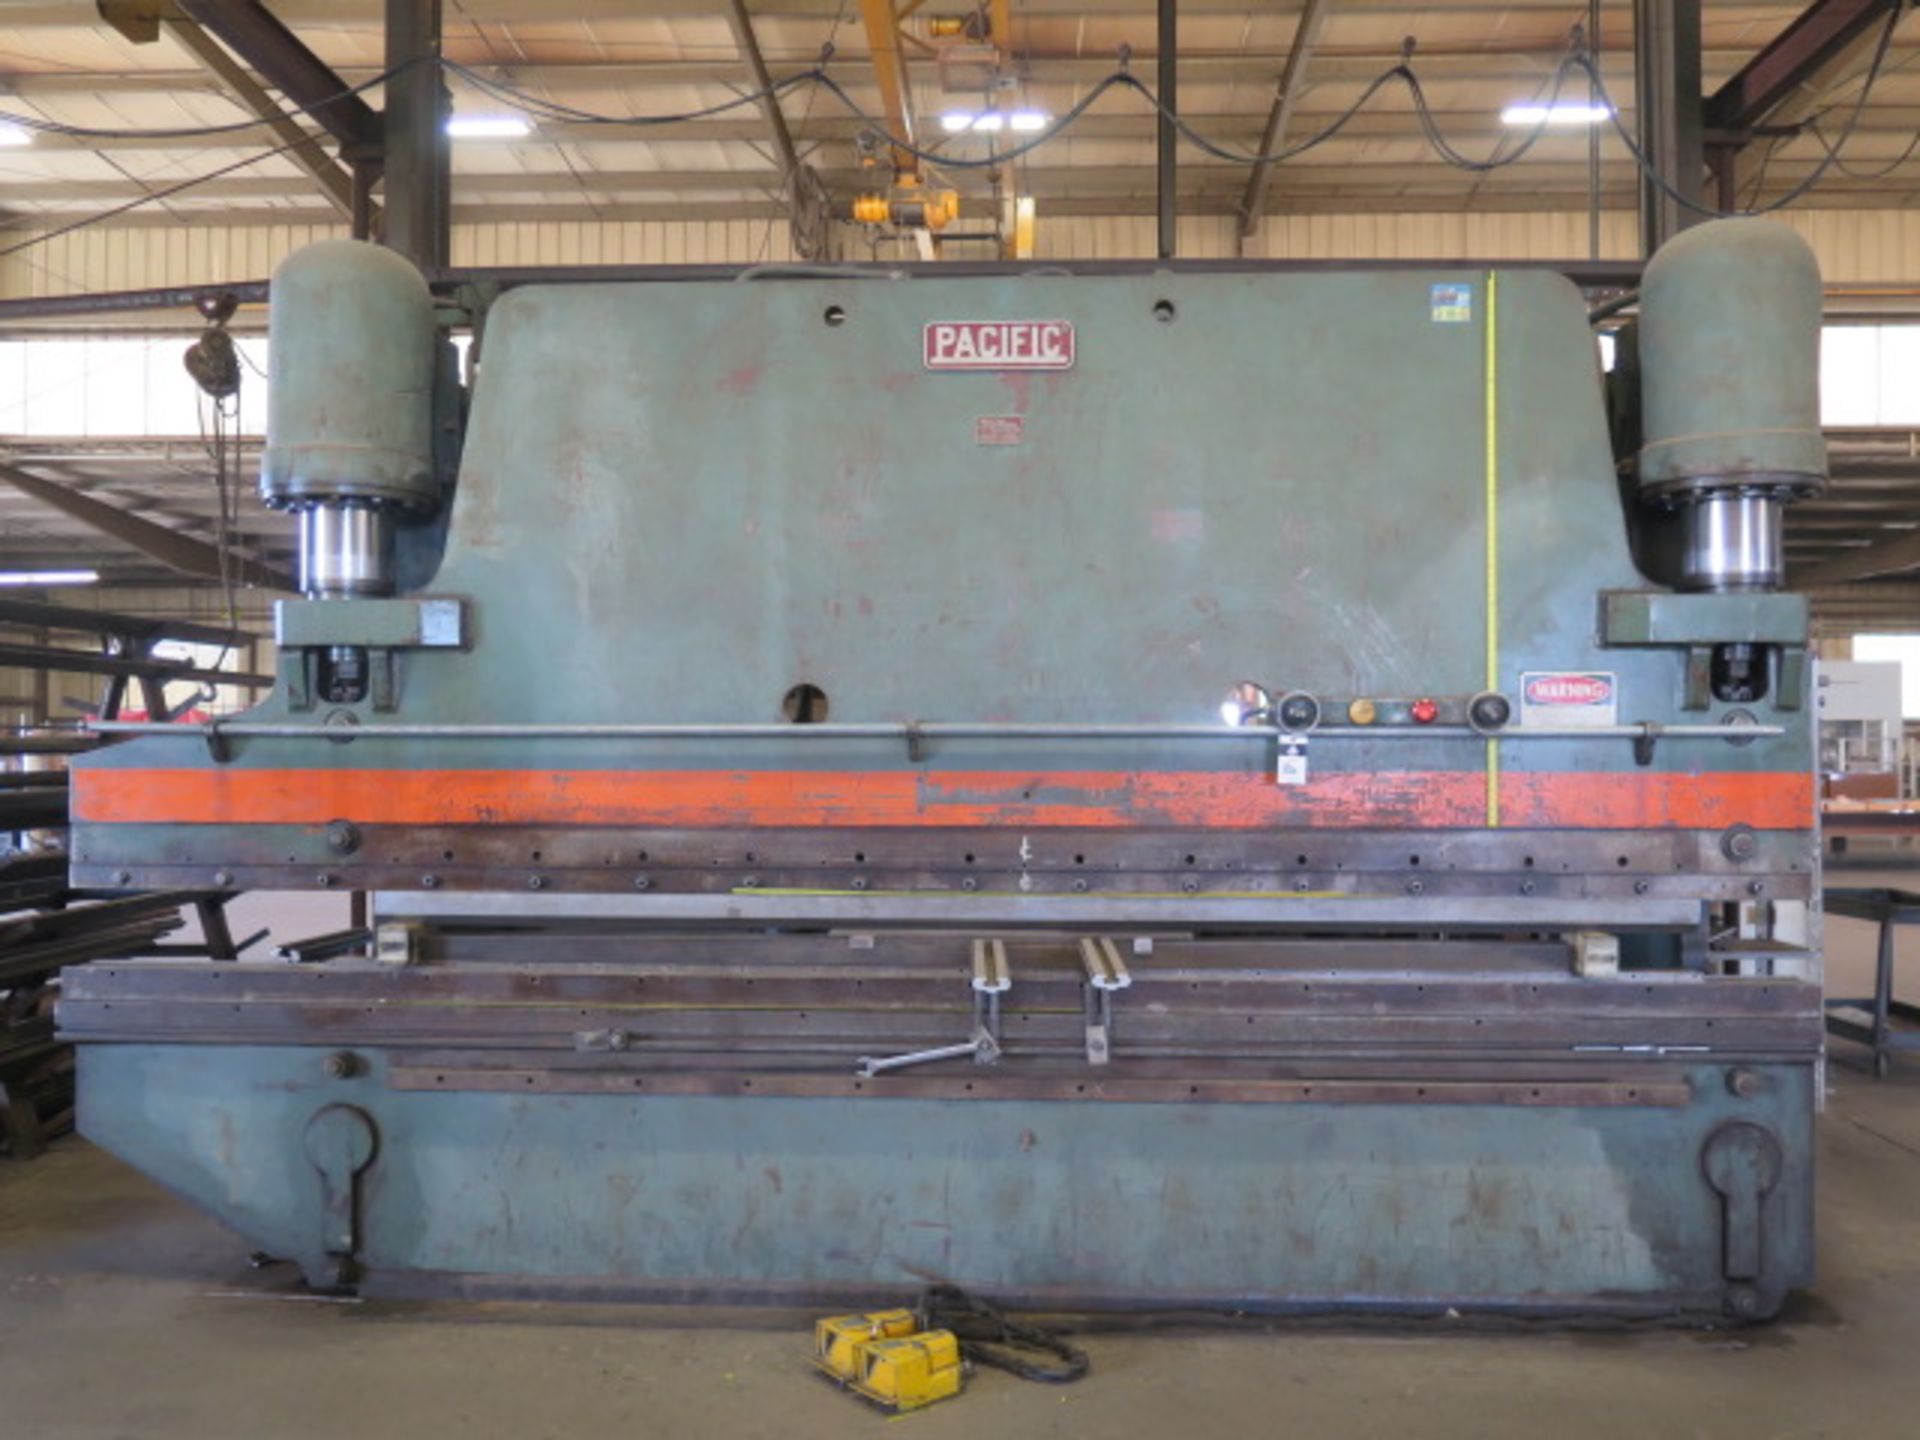 Pacific K300-16 5 1/6” x 14’ Hydraulic Press Brake s/n 6909 w/ 16’ Bed Length, SOLD AS IS